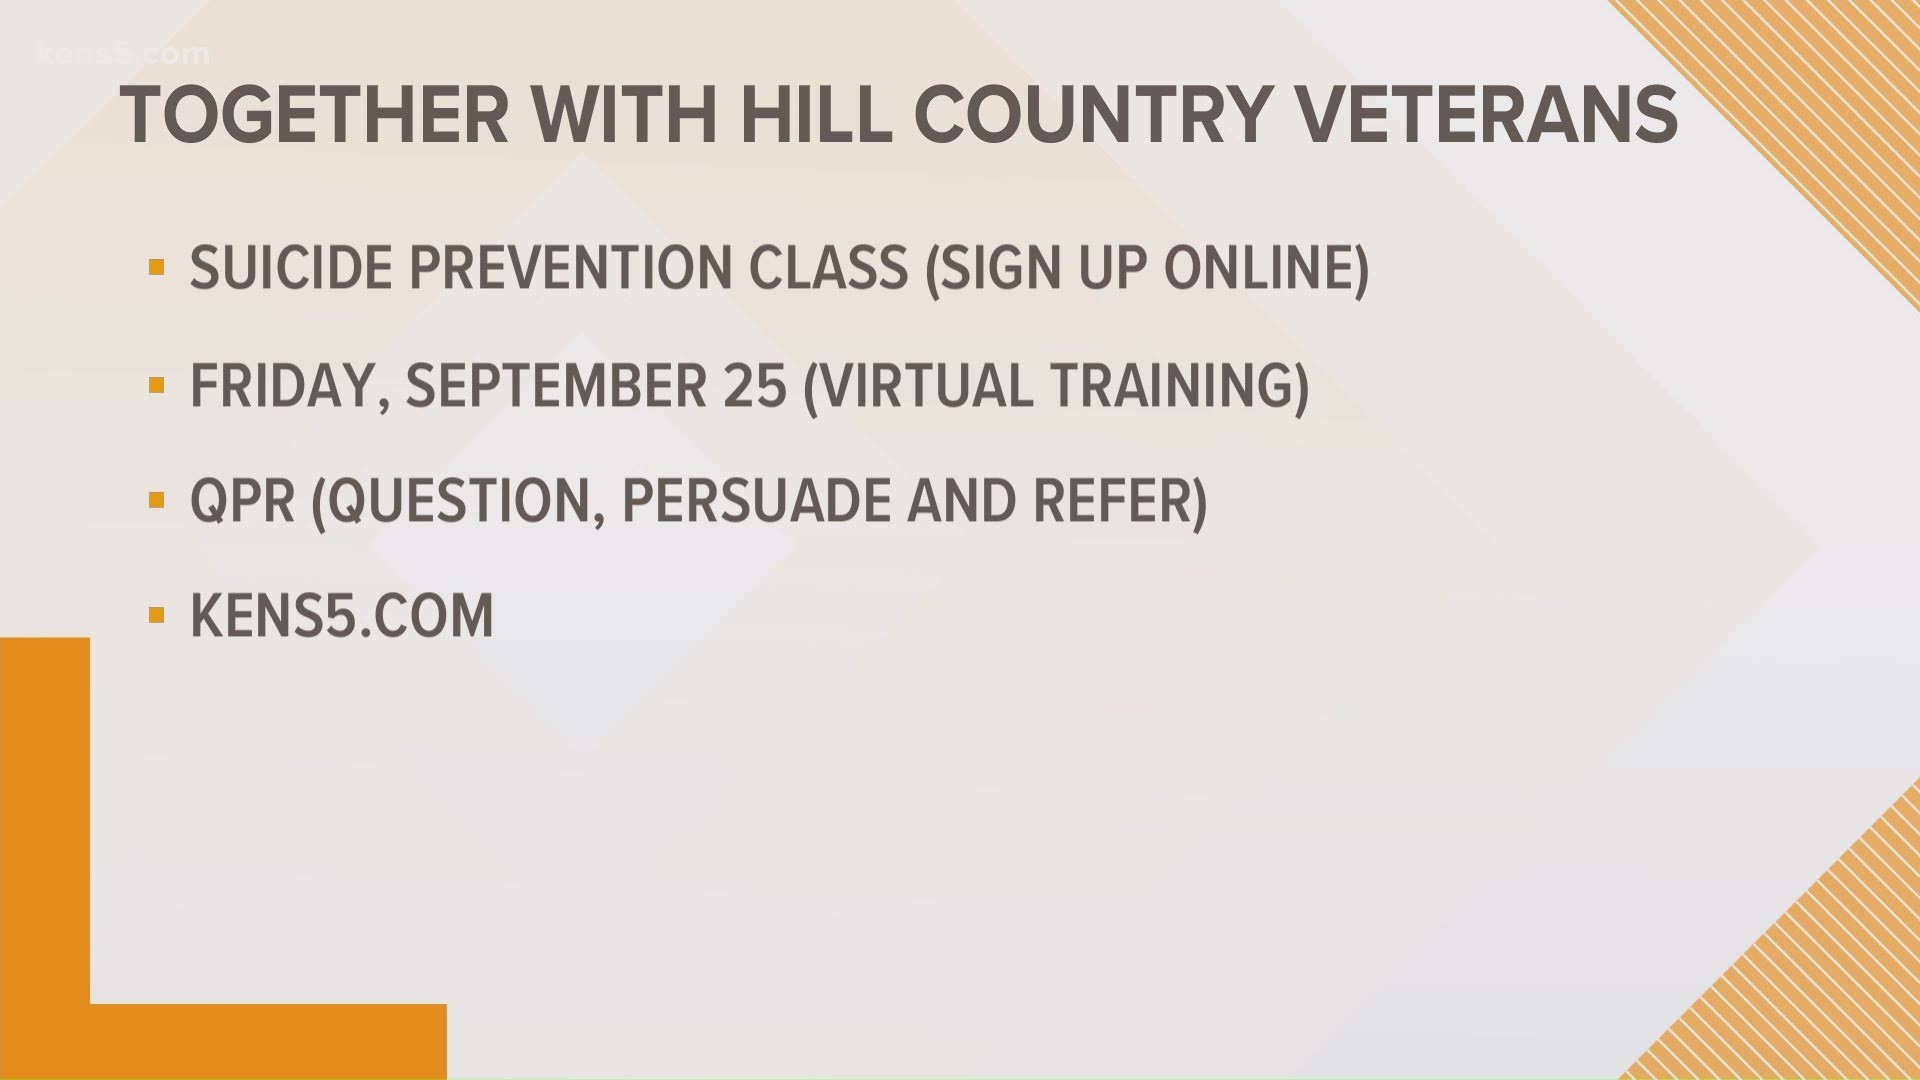 How a new program is offering help for veterans in the San Antonio area.